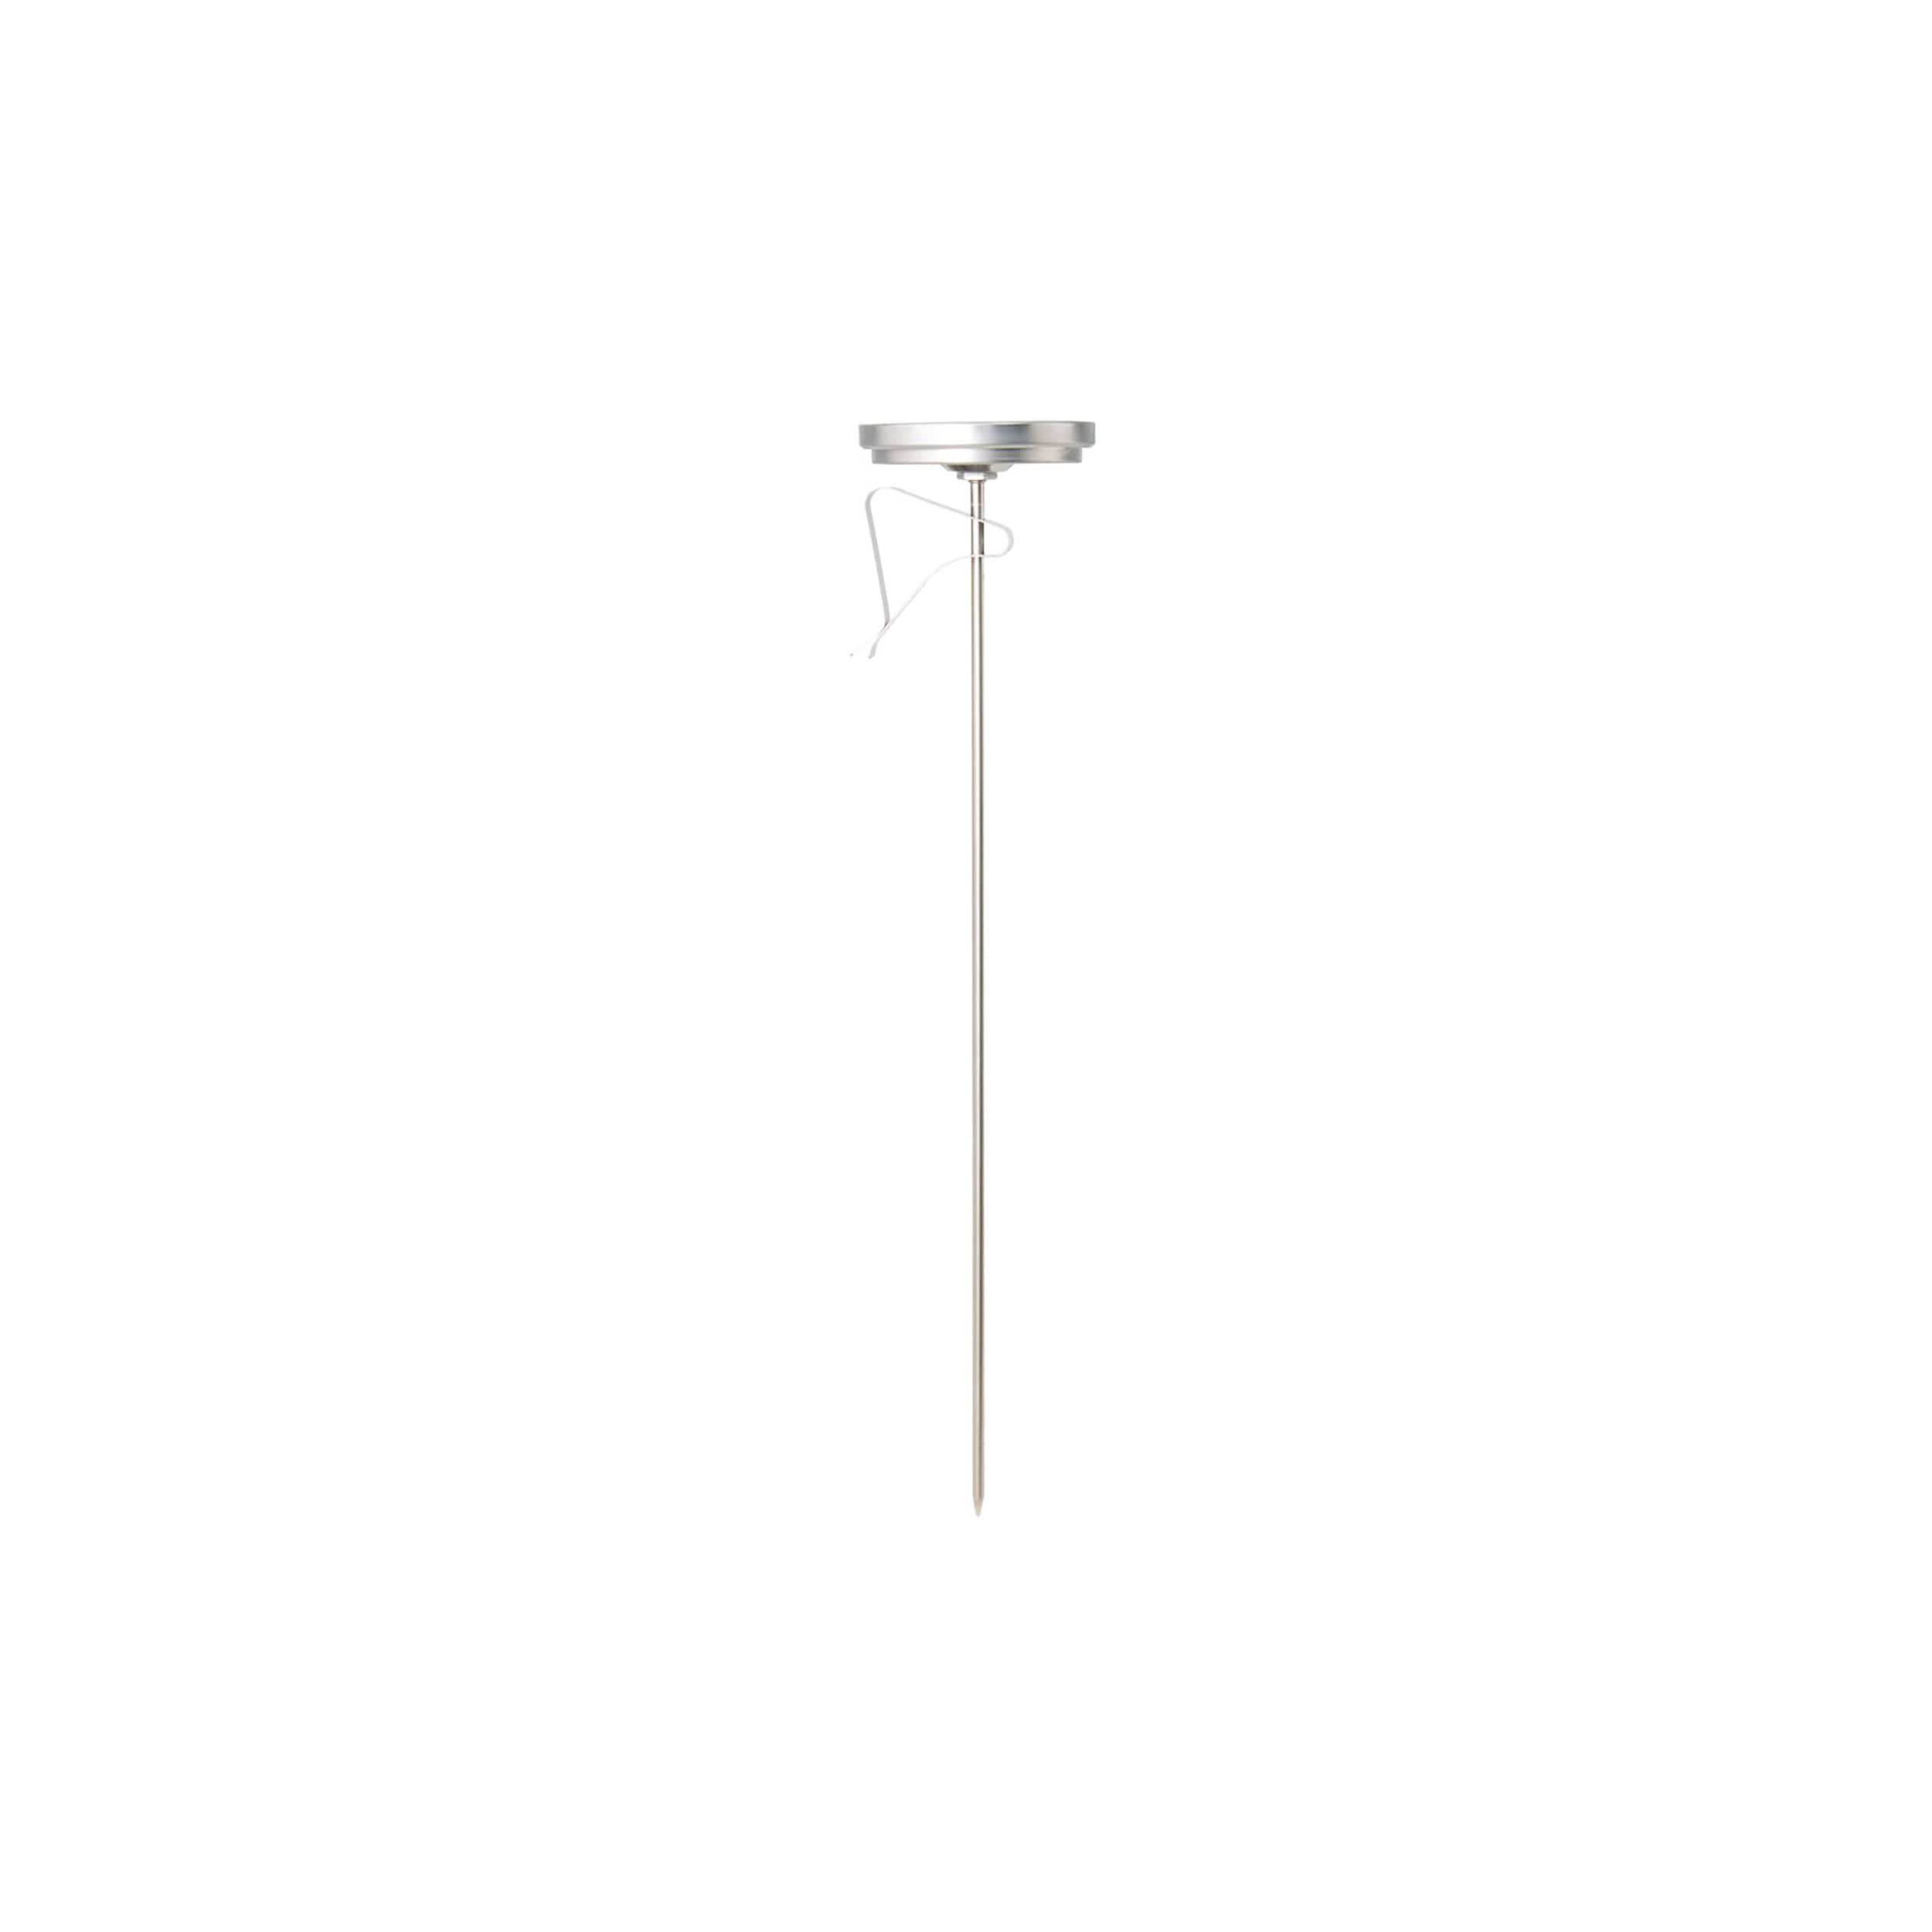 Choice 12 Candy / Deep Fry Probe Thermometer